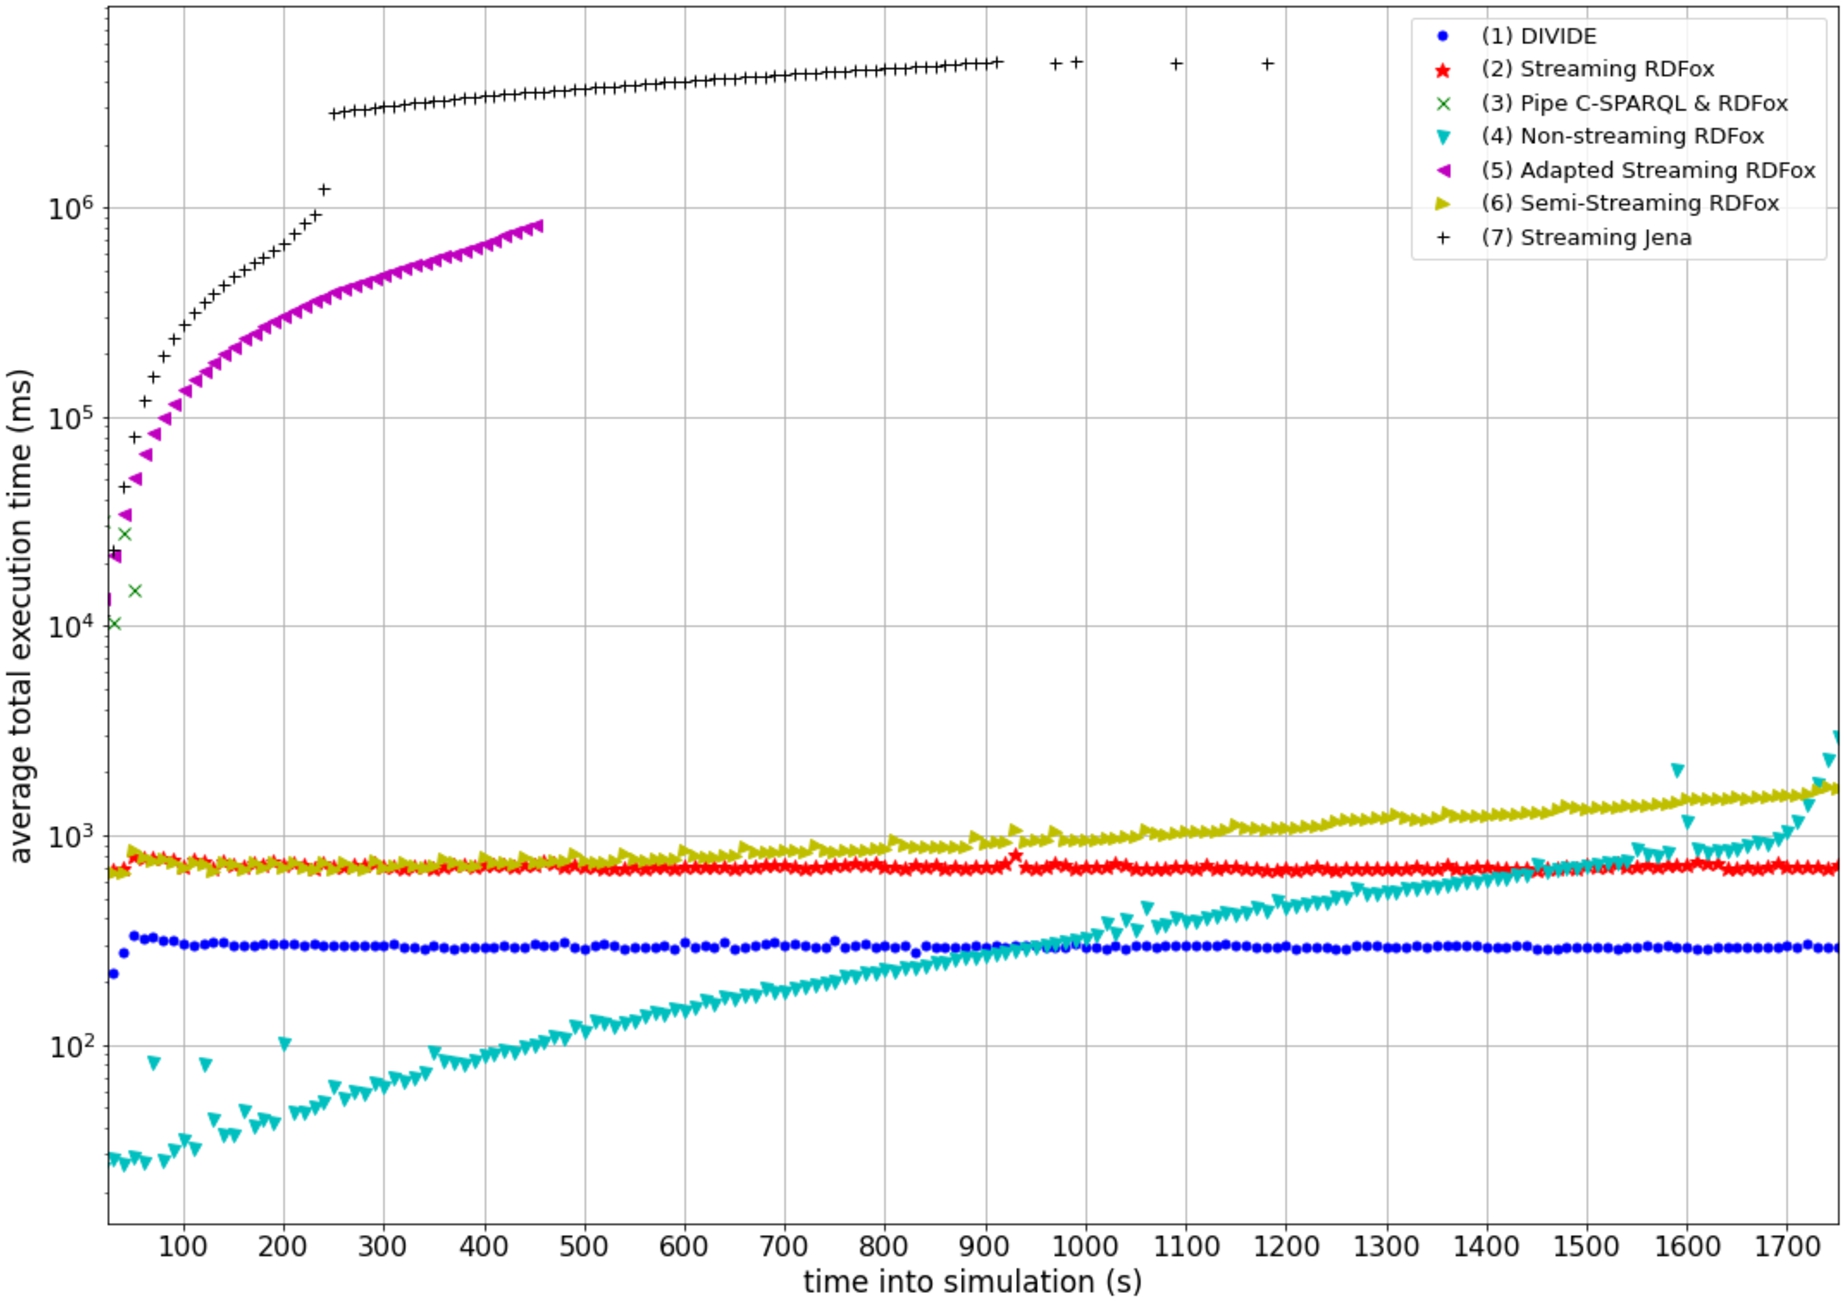 Results of the comparison of the DIVIDE real-time query evaluation approach with real-time reasoning approaches, for the toileting query. For each evaluation set-up, the results show the evolution over time of the total execution time from the generated event (either a windowed event in a streaming set-up or an incoming event in a non-streaming set-up) until the routine activity prediction as output of the final query. For all set-ups, measurements are shown for the processed event, either incoming or windowed, at every 10 seconds. All plotted execution times are averaged over the evaluation runs.